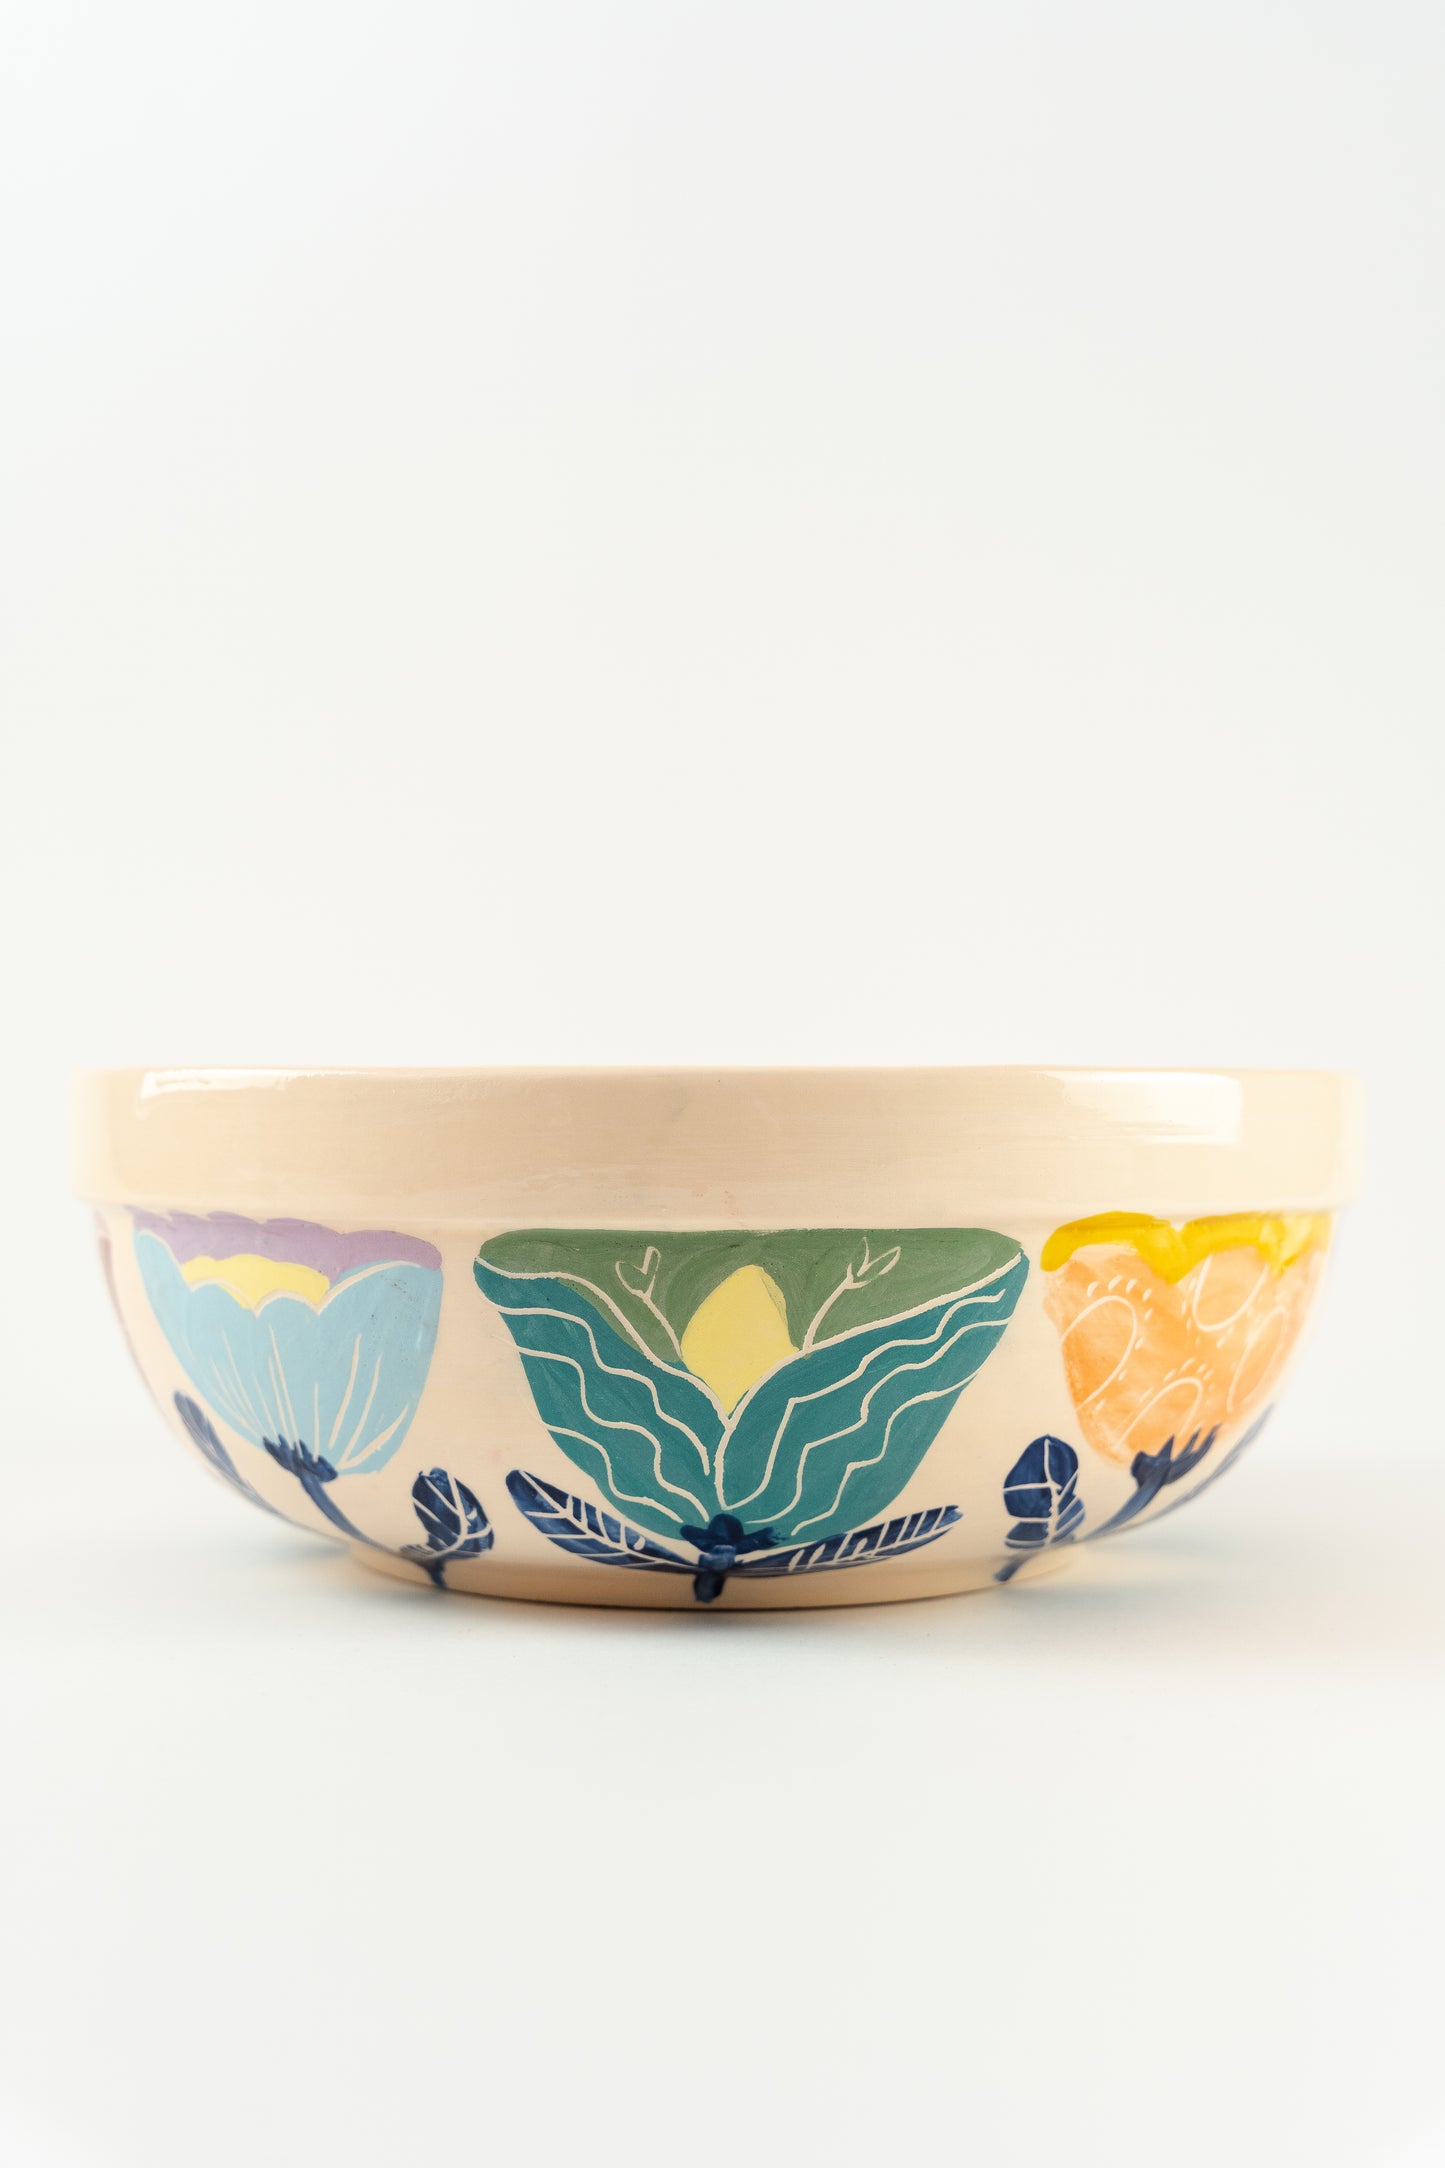 The side of the Handmade ceramic serving bowls fpor salads, with colorful flower details and a kind face design on the bottom of the bowl